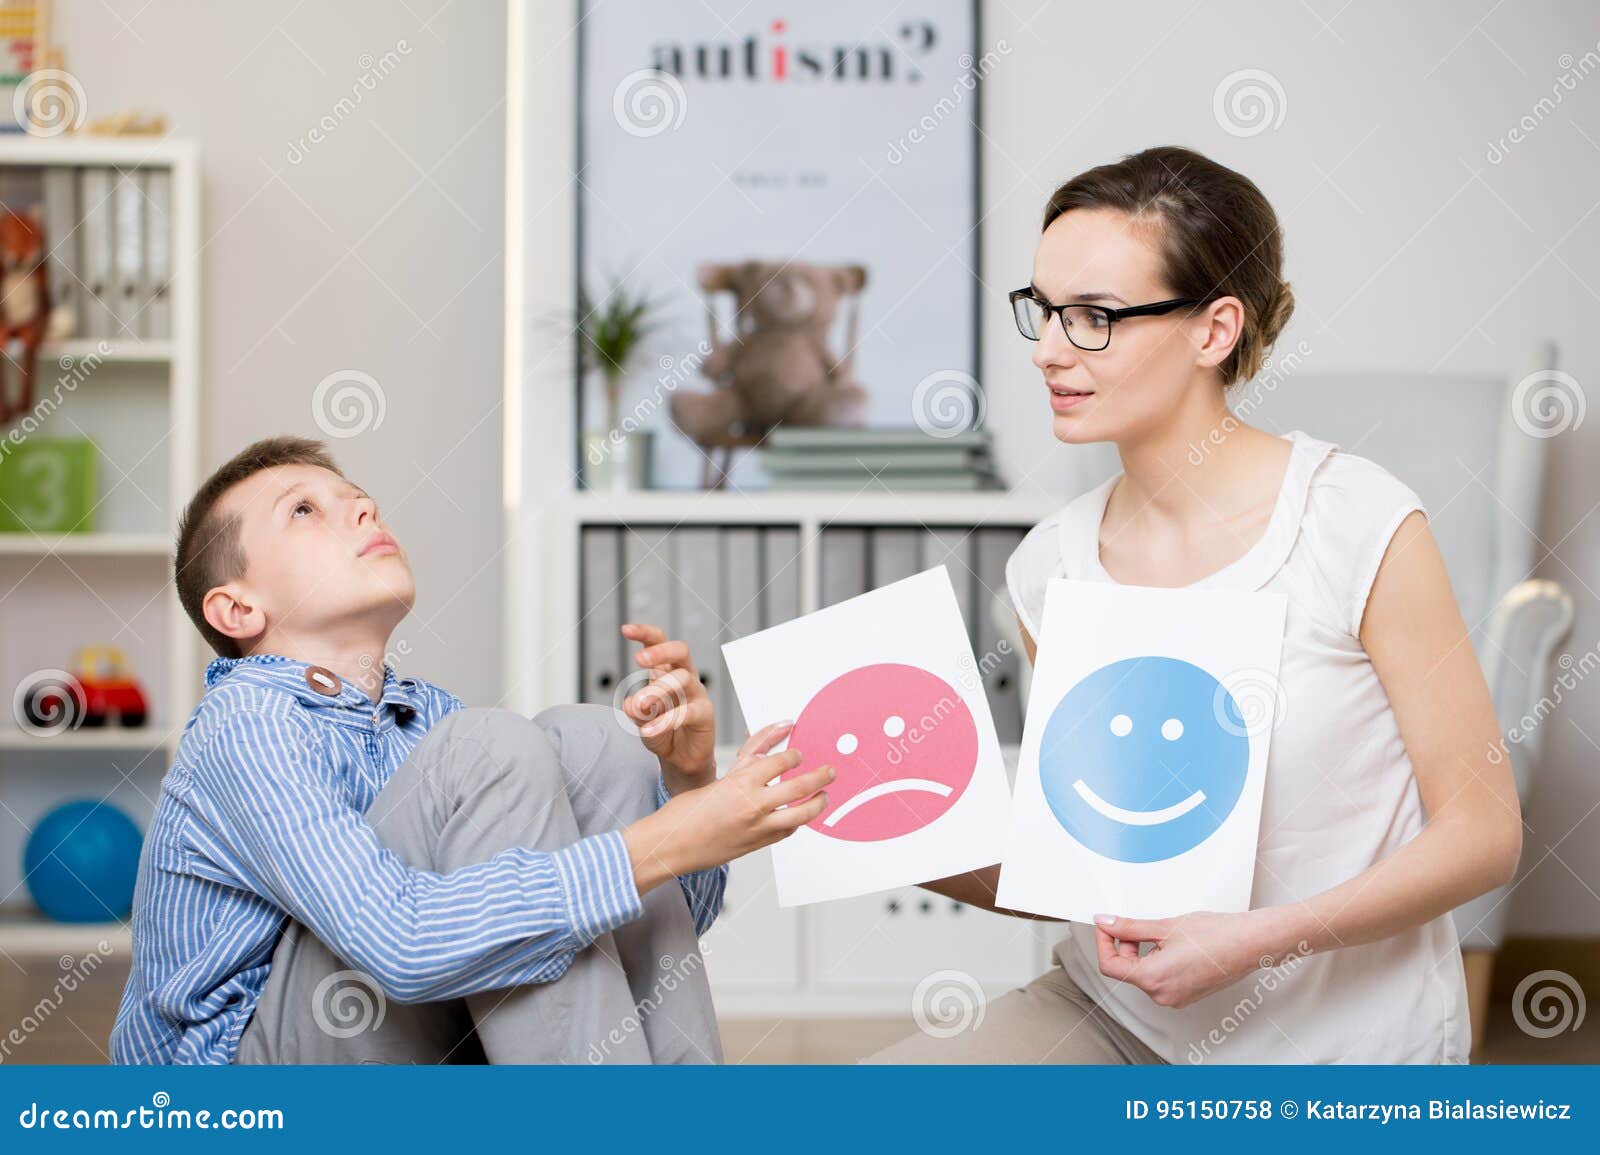 psychologist working with autistic boy